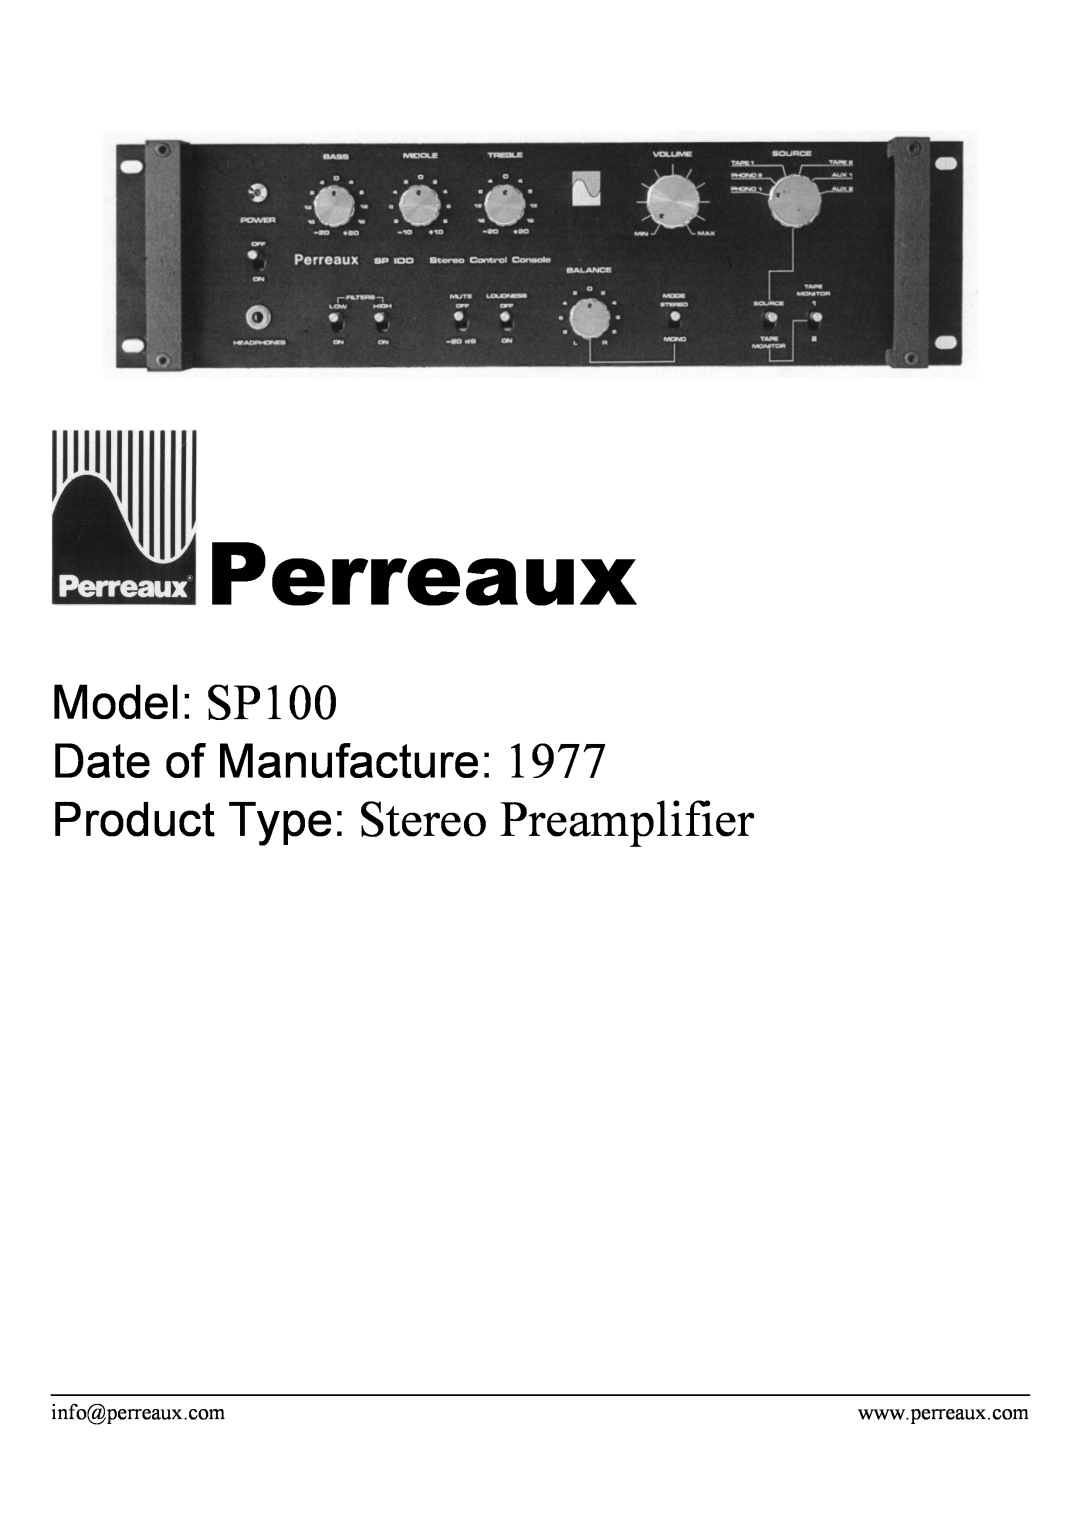 Perreaux manual Perreaux, Product Type Stereo Preamplifier, Model SP100 Date of Manufacture 